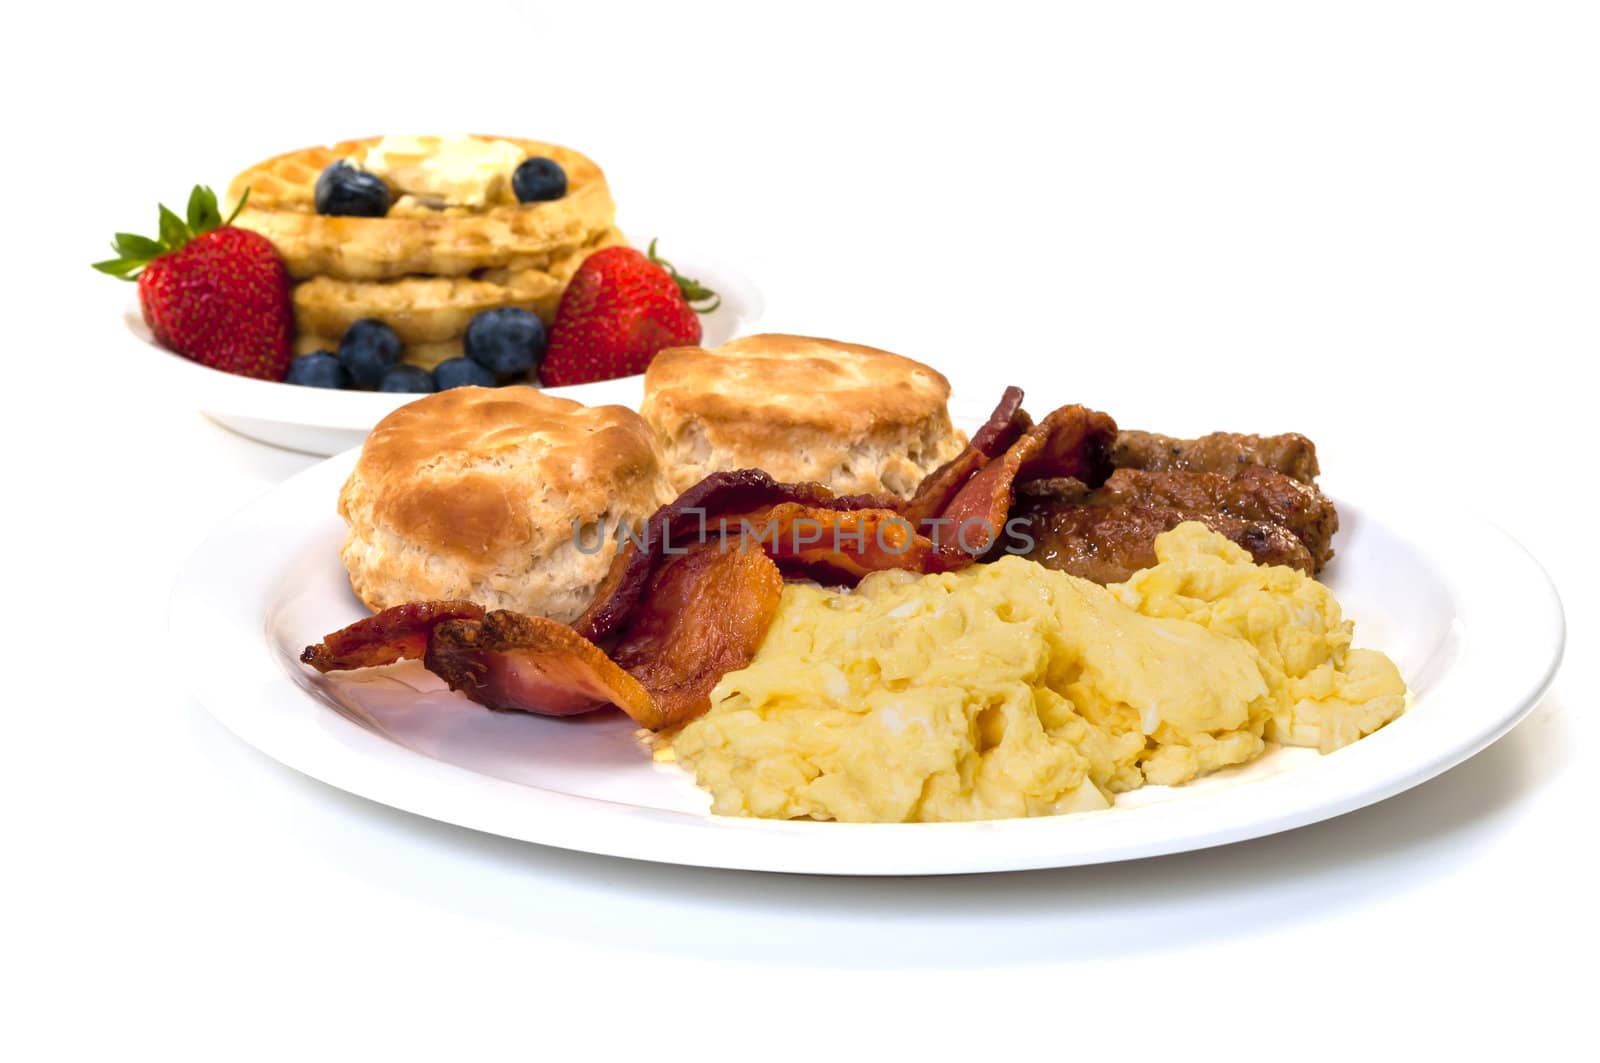 Scrambled eggs, bacon, link sausage, biscuits,  and waffles with strawberries and blueberries.  Isolated on white background.